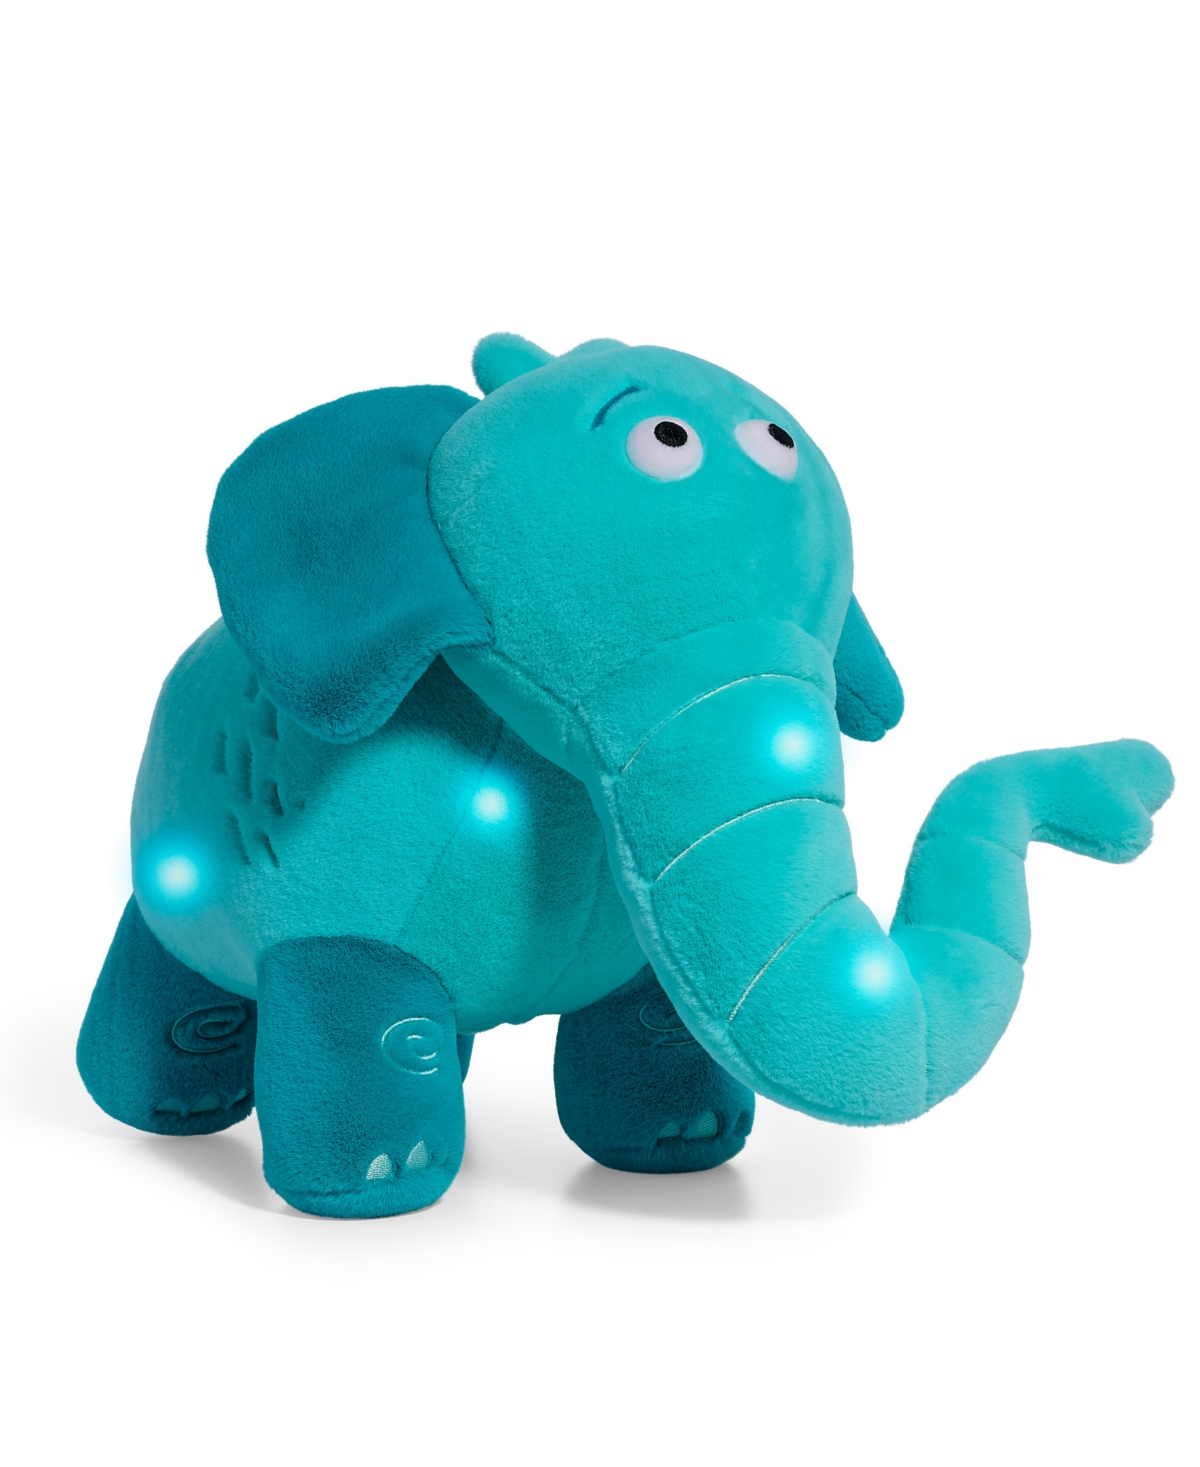 Geoffrey's Toy Box Kids' 14" Toy Plush Led With Sound Elephant Buddies, Created For Macys In Turquoise,aqua